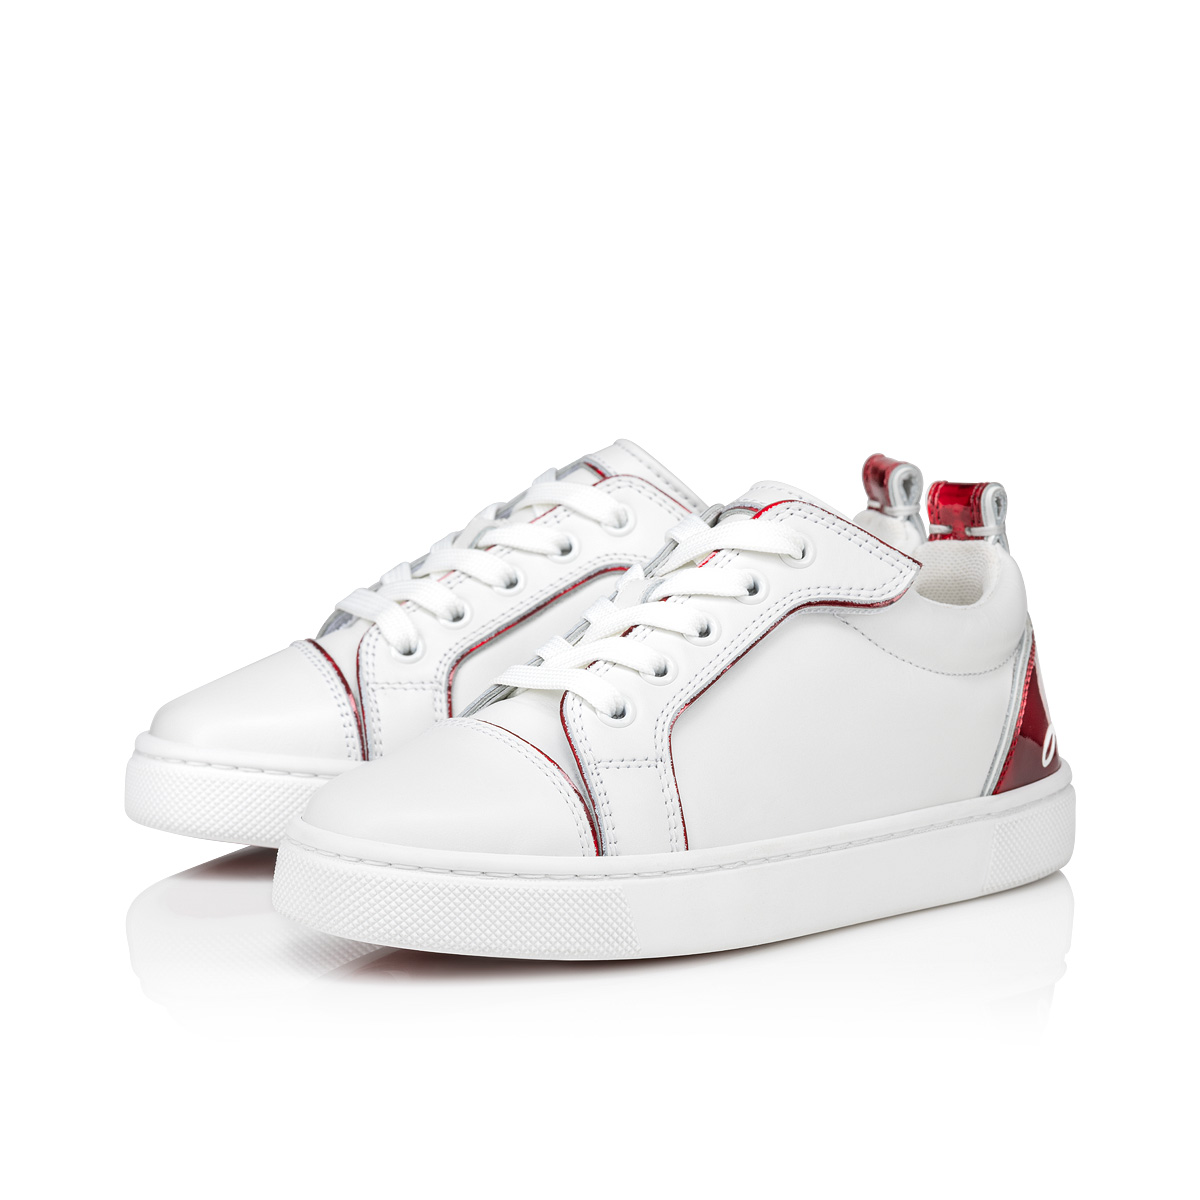 Funnyto - Sneakers - Calf leather and patent calf leather Psychic ...